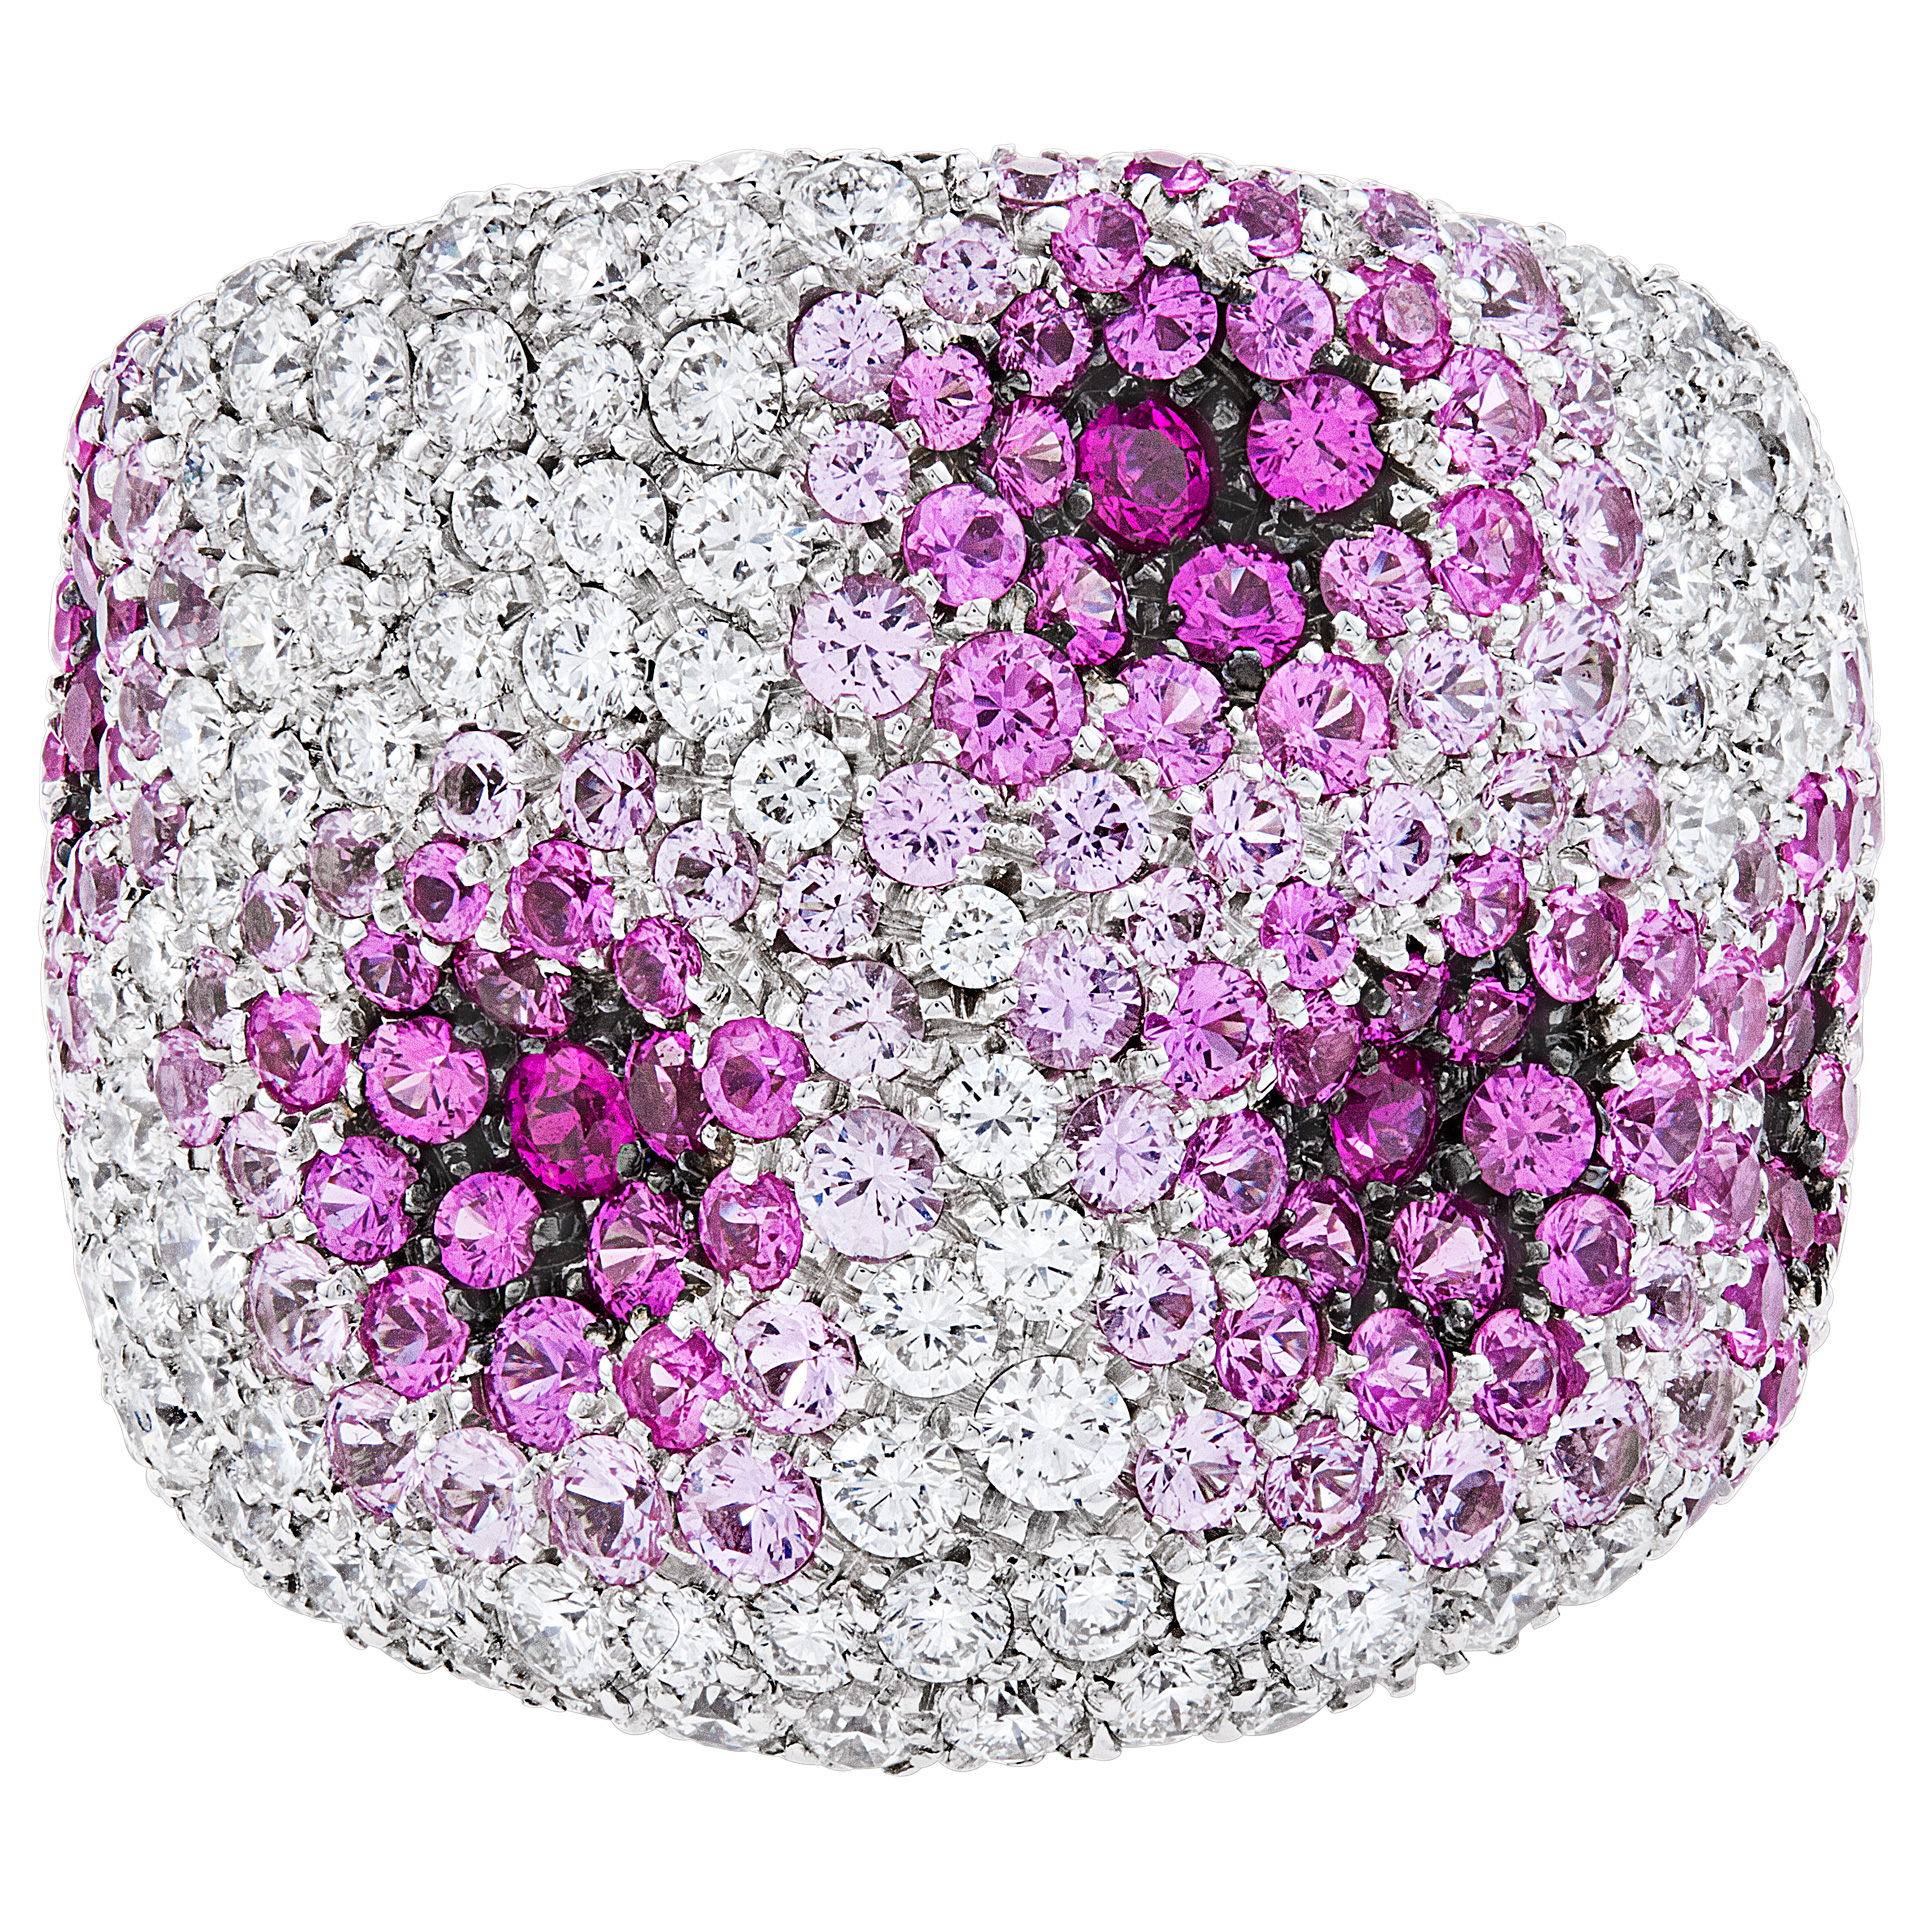 Pink sapphire & diamond pave ring in 18k white gold. 3.98cts (F-G, V-S) in dia's